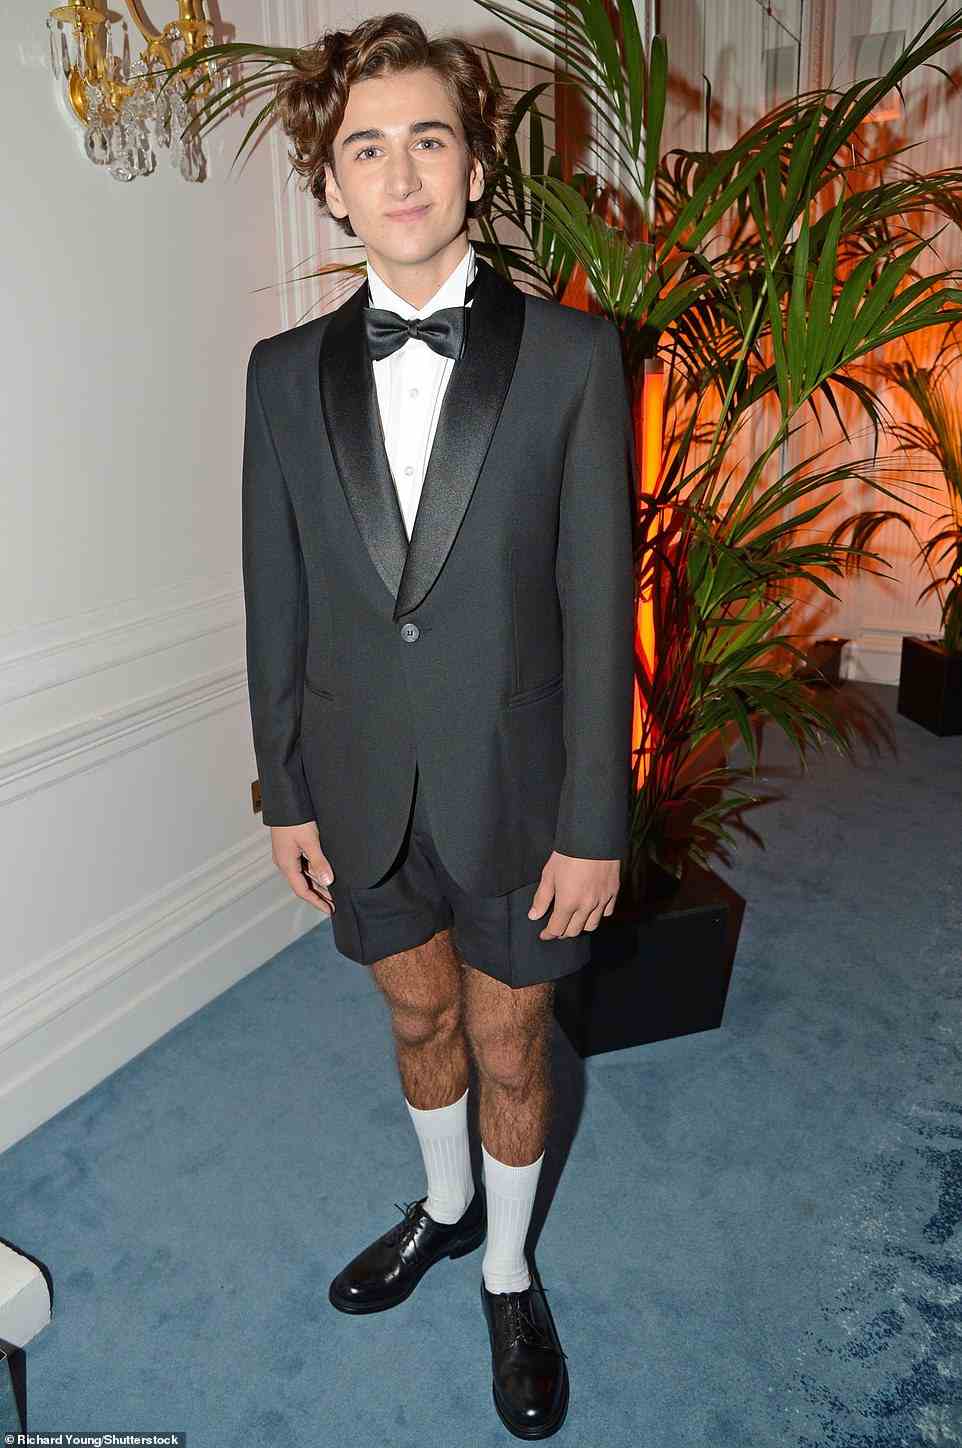 Smart: Heartstopper star Sebastian Croft, who plays Ben Hope in the Netflix LGBTQI+ series, looked suave in shorts and a tuxedo